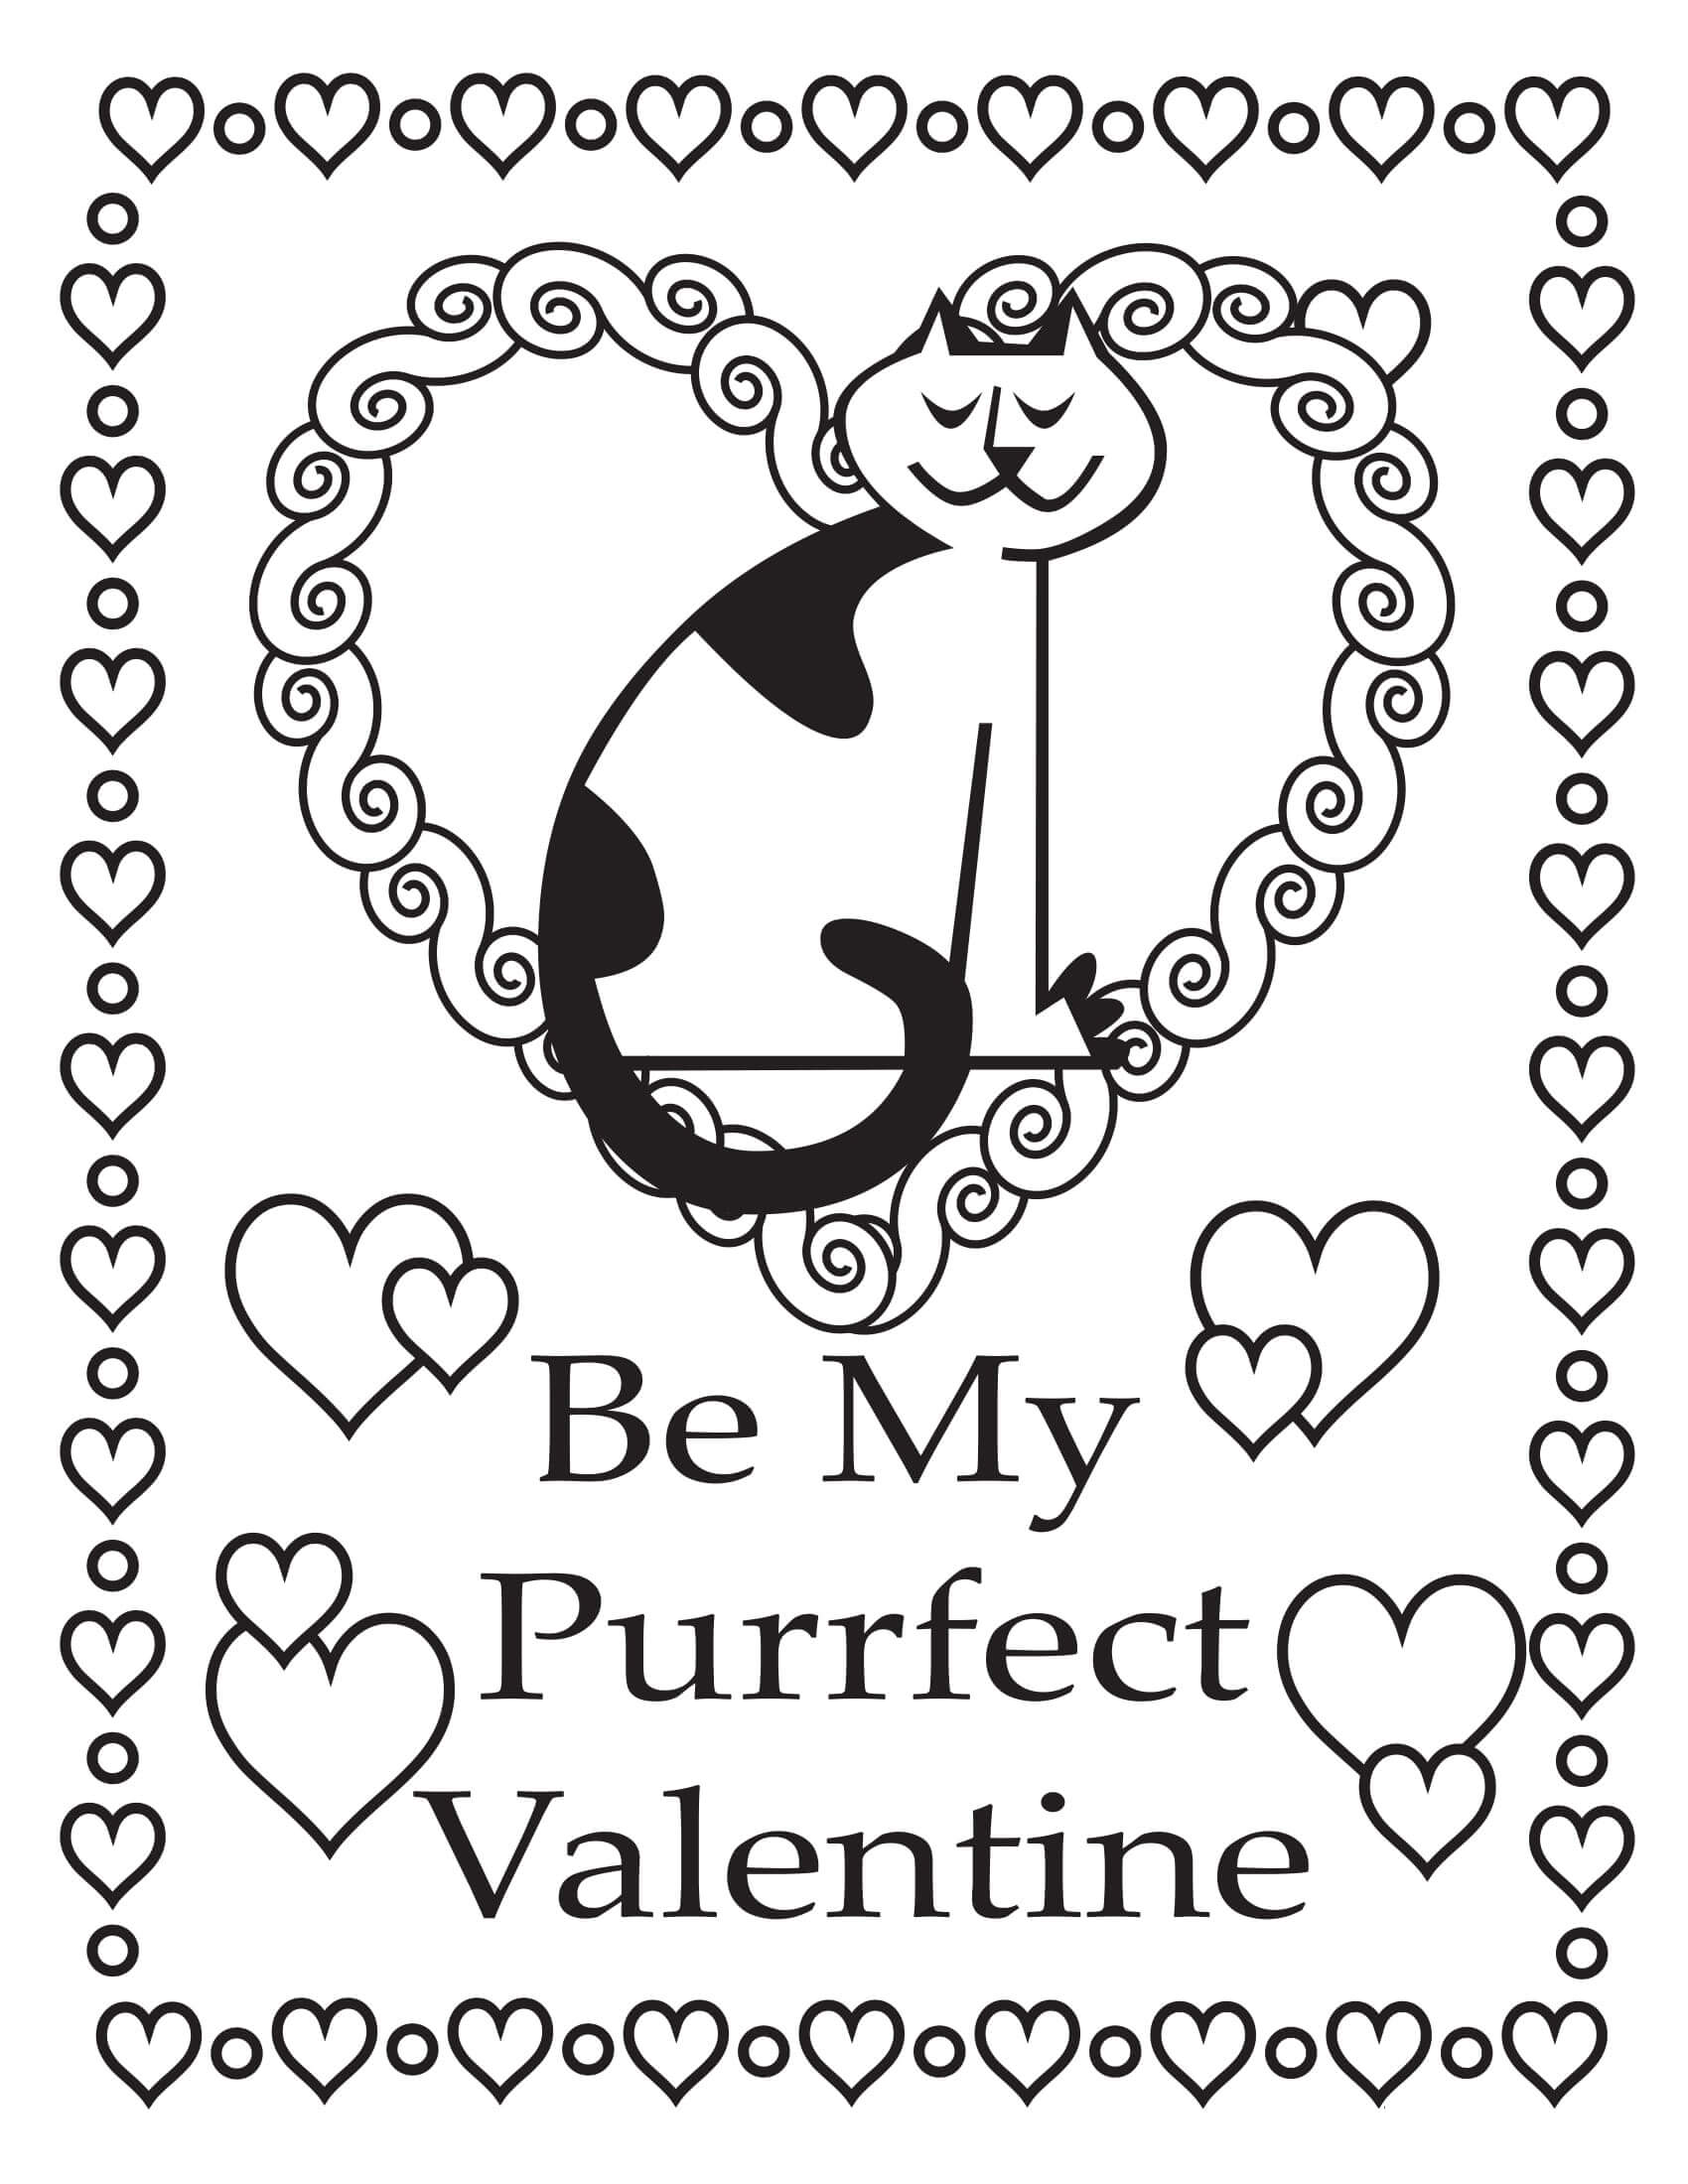 Be My Perfect Valentine Coloring Page